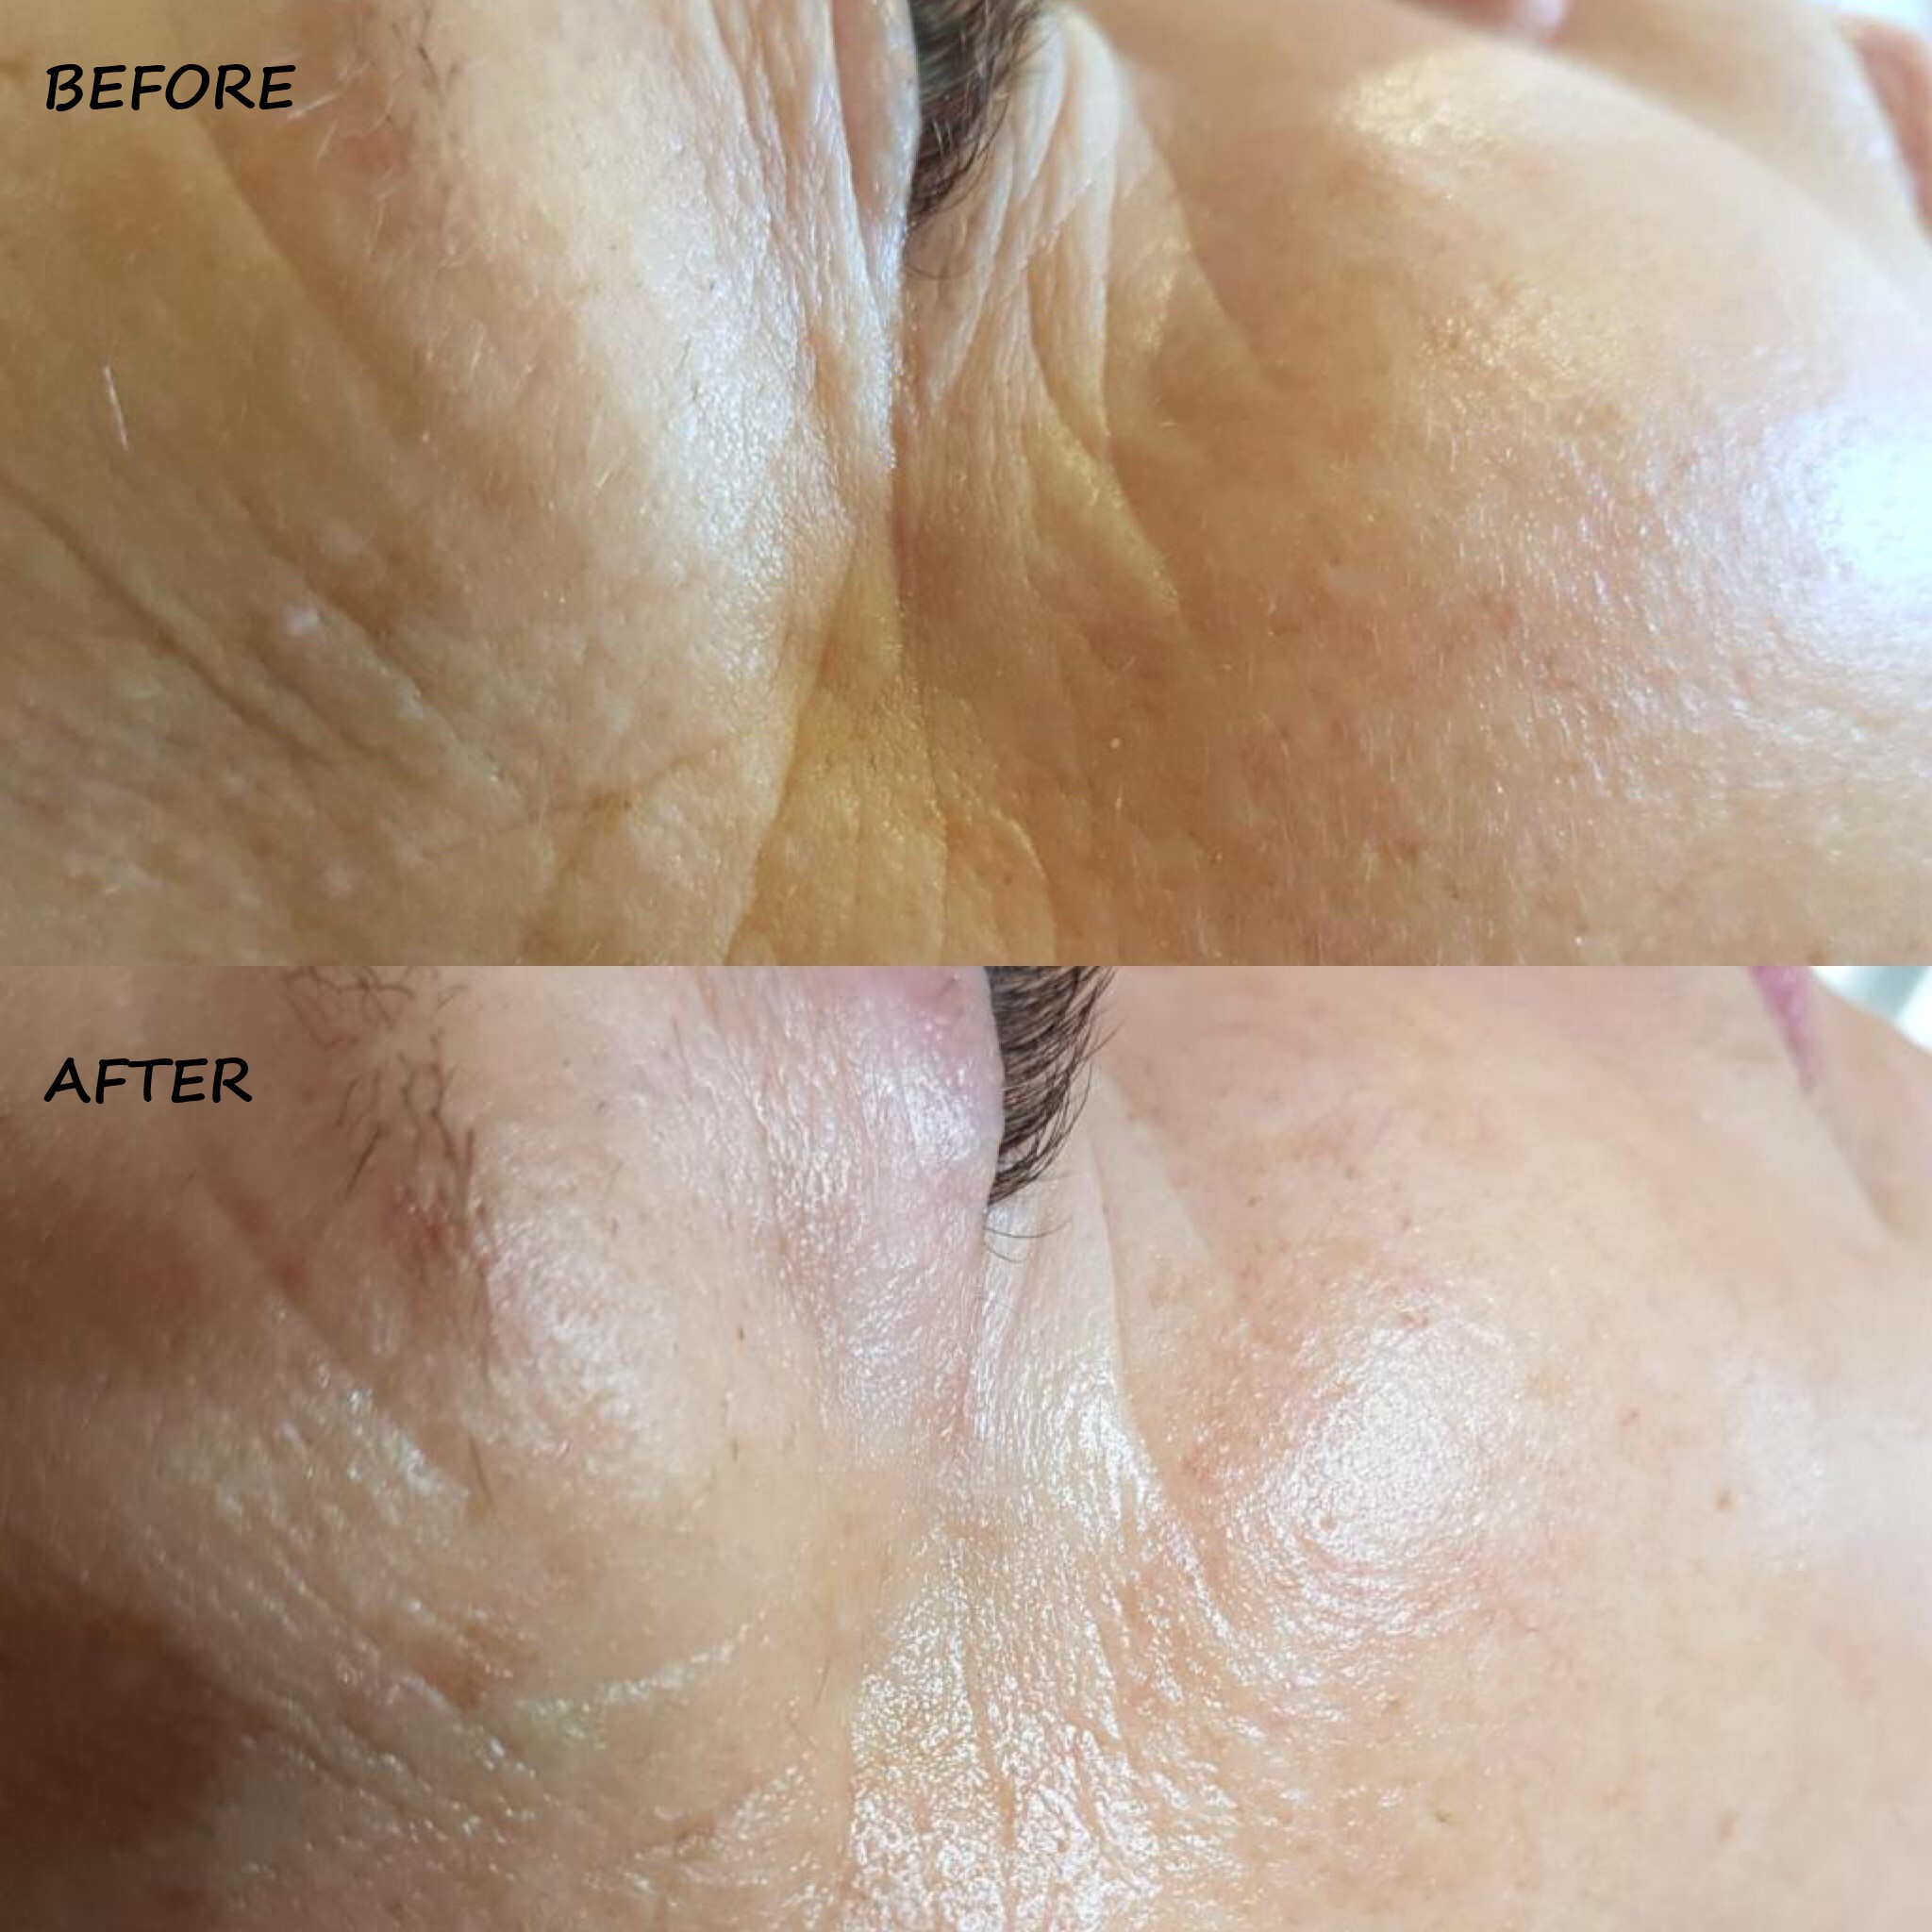 DermaOxy Before & After images